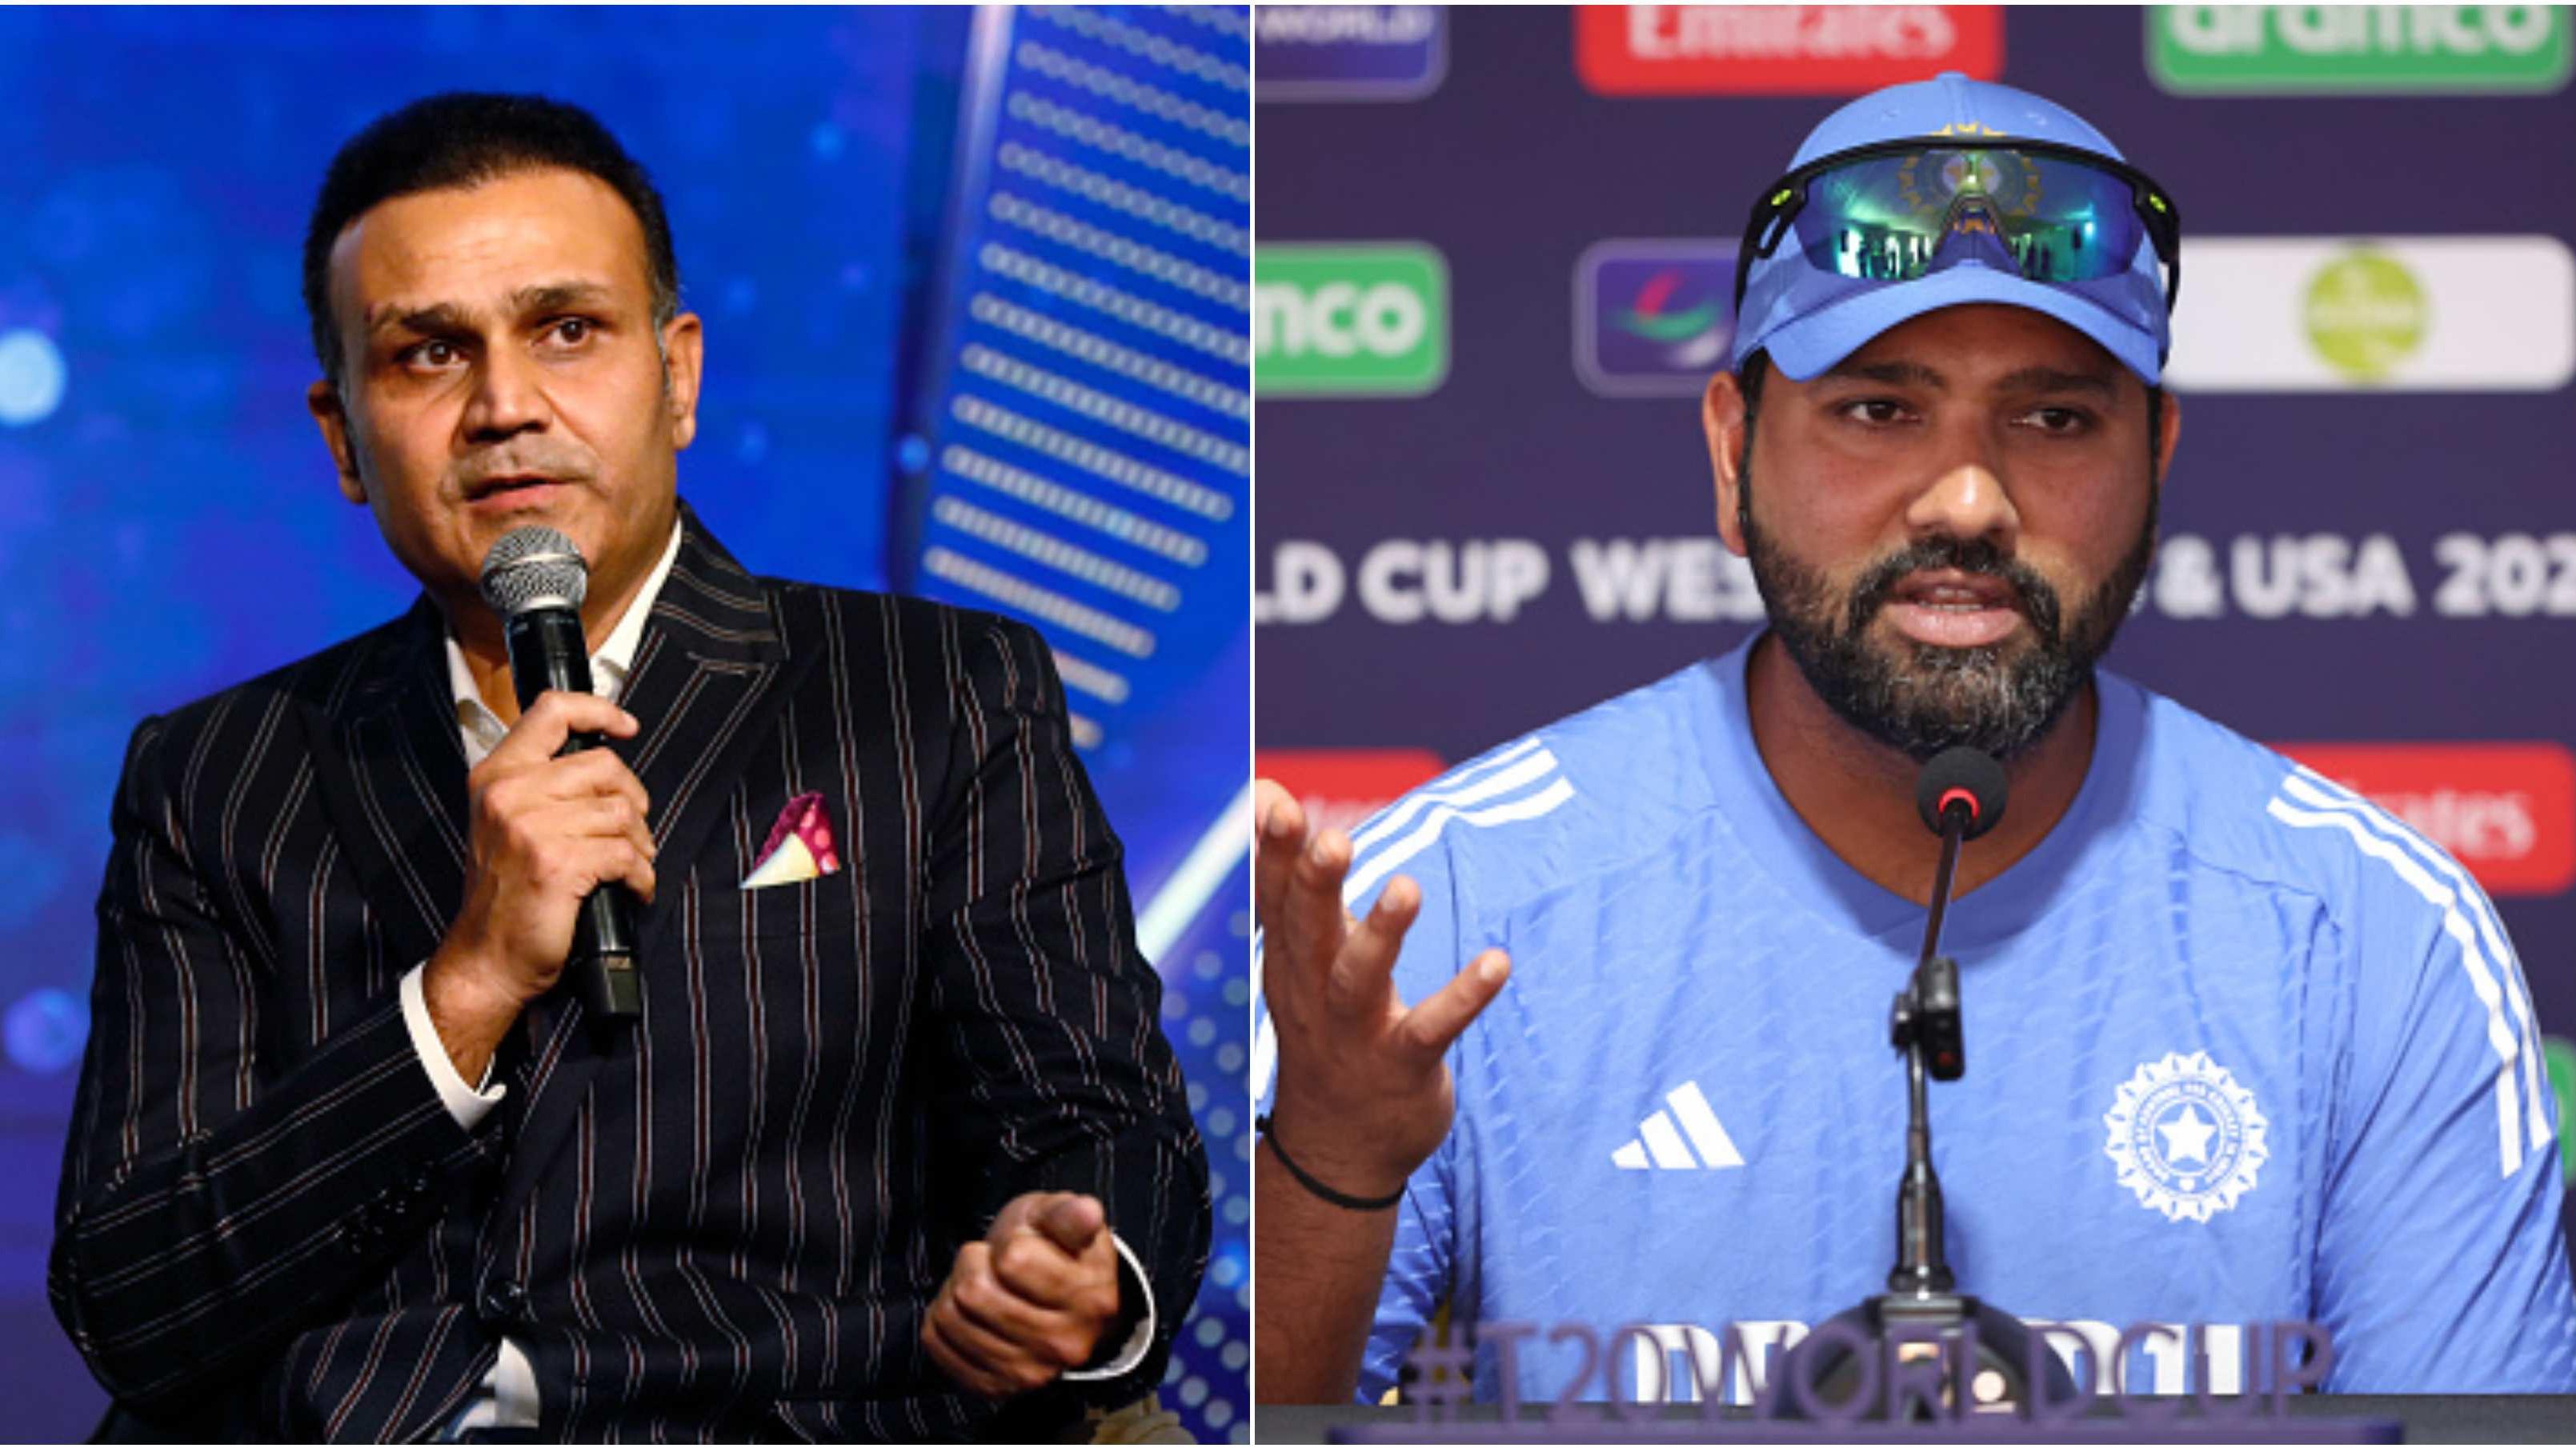 “I wouldn't have replied”: Sehwag annoyed by ‘ball-tampering question’ being asked to Rohit Sharma in press conference